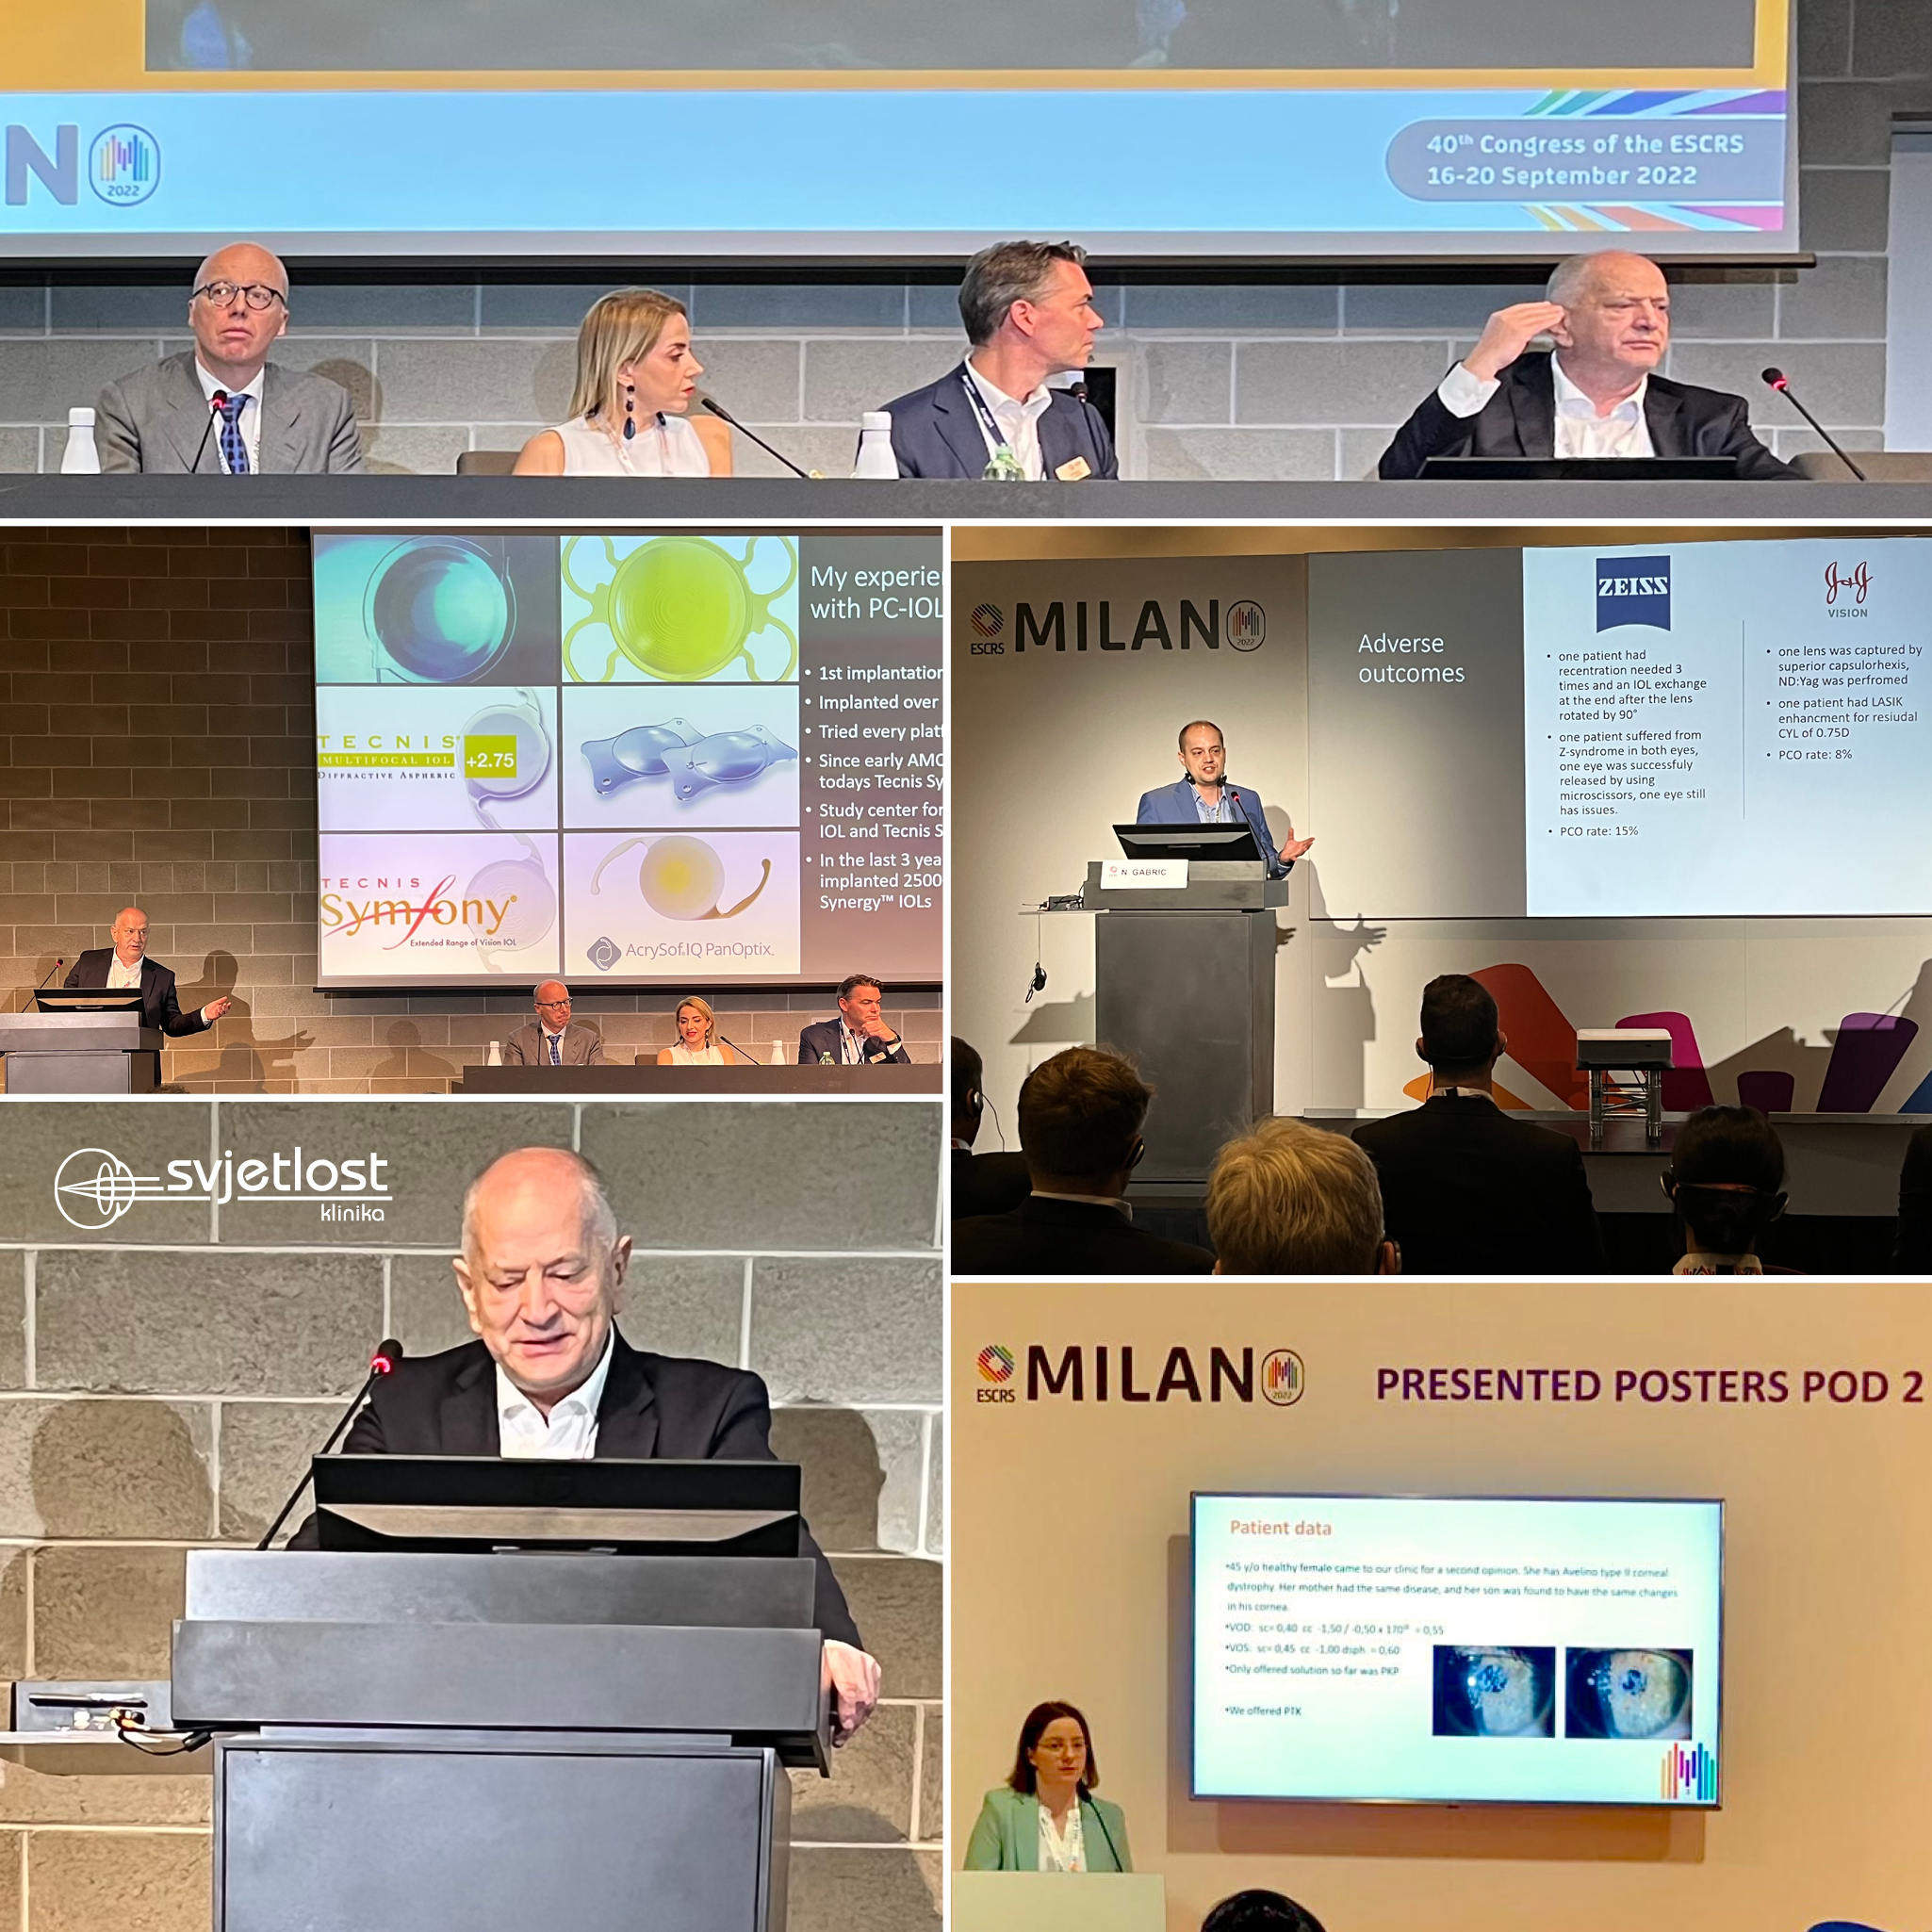 Svjetlost participated at ESCRS meeting in Milan